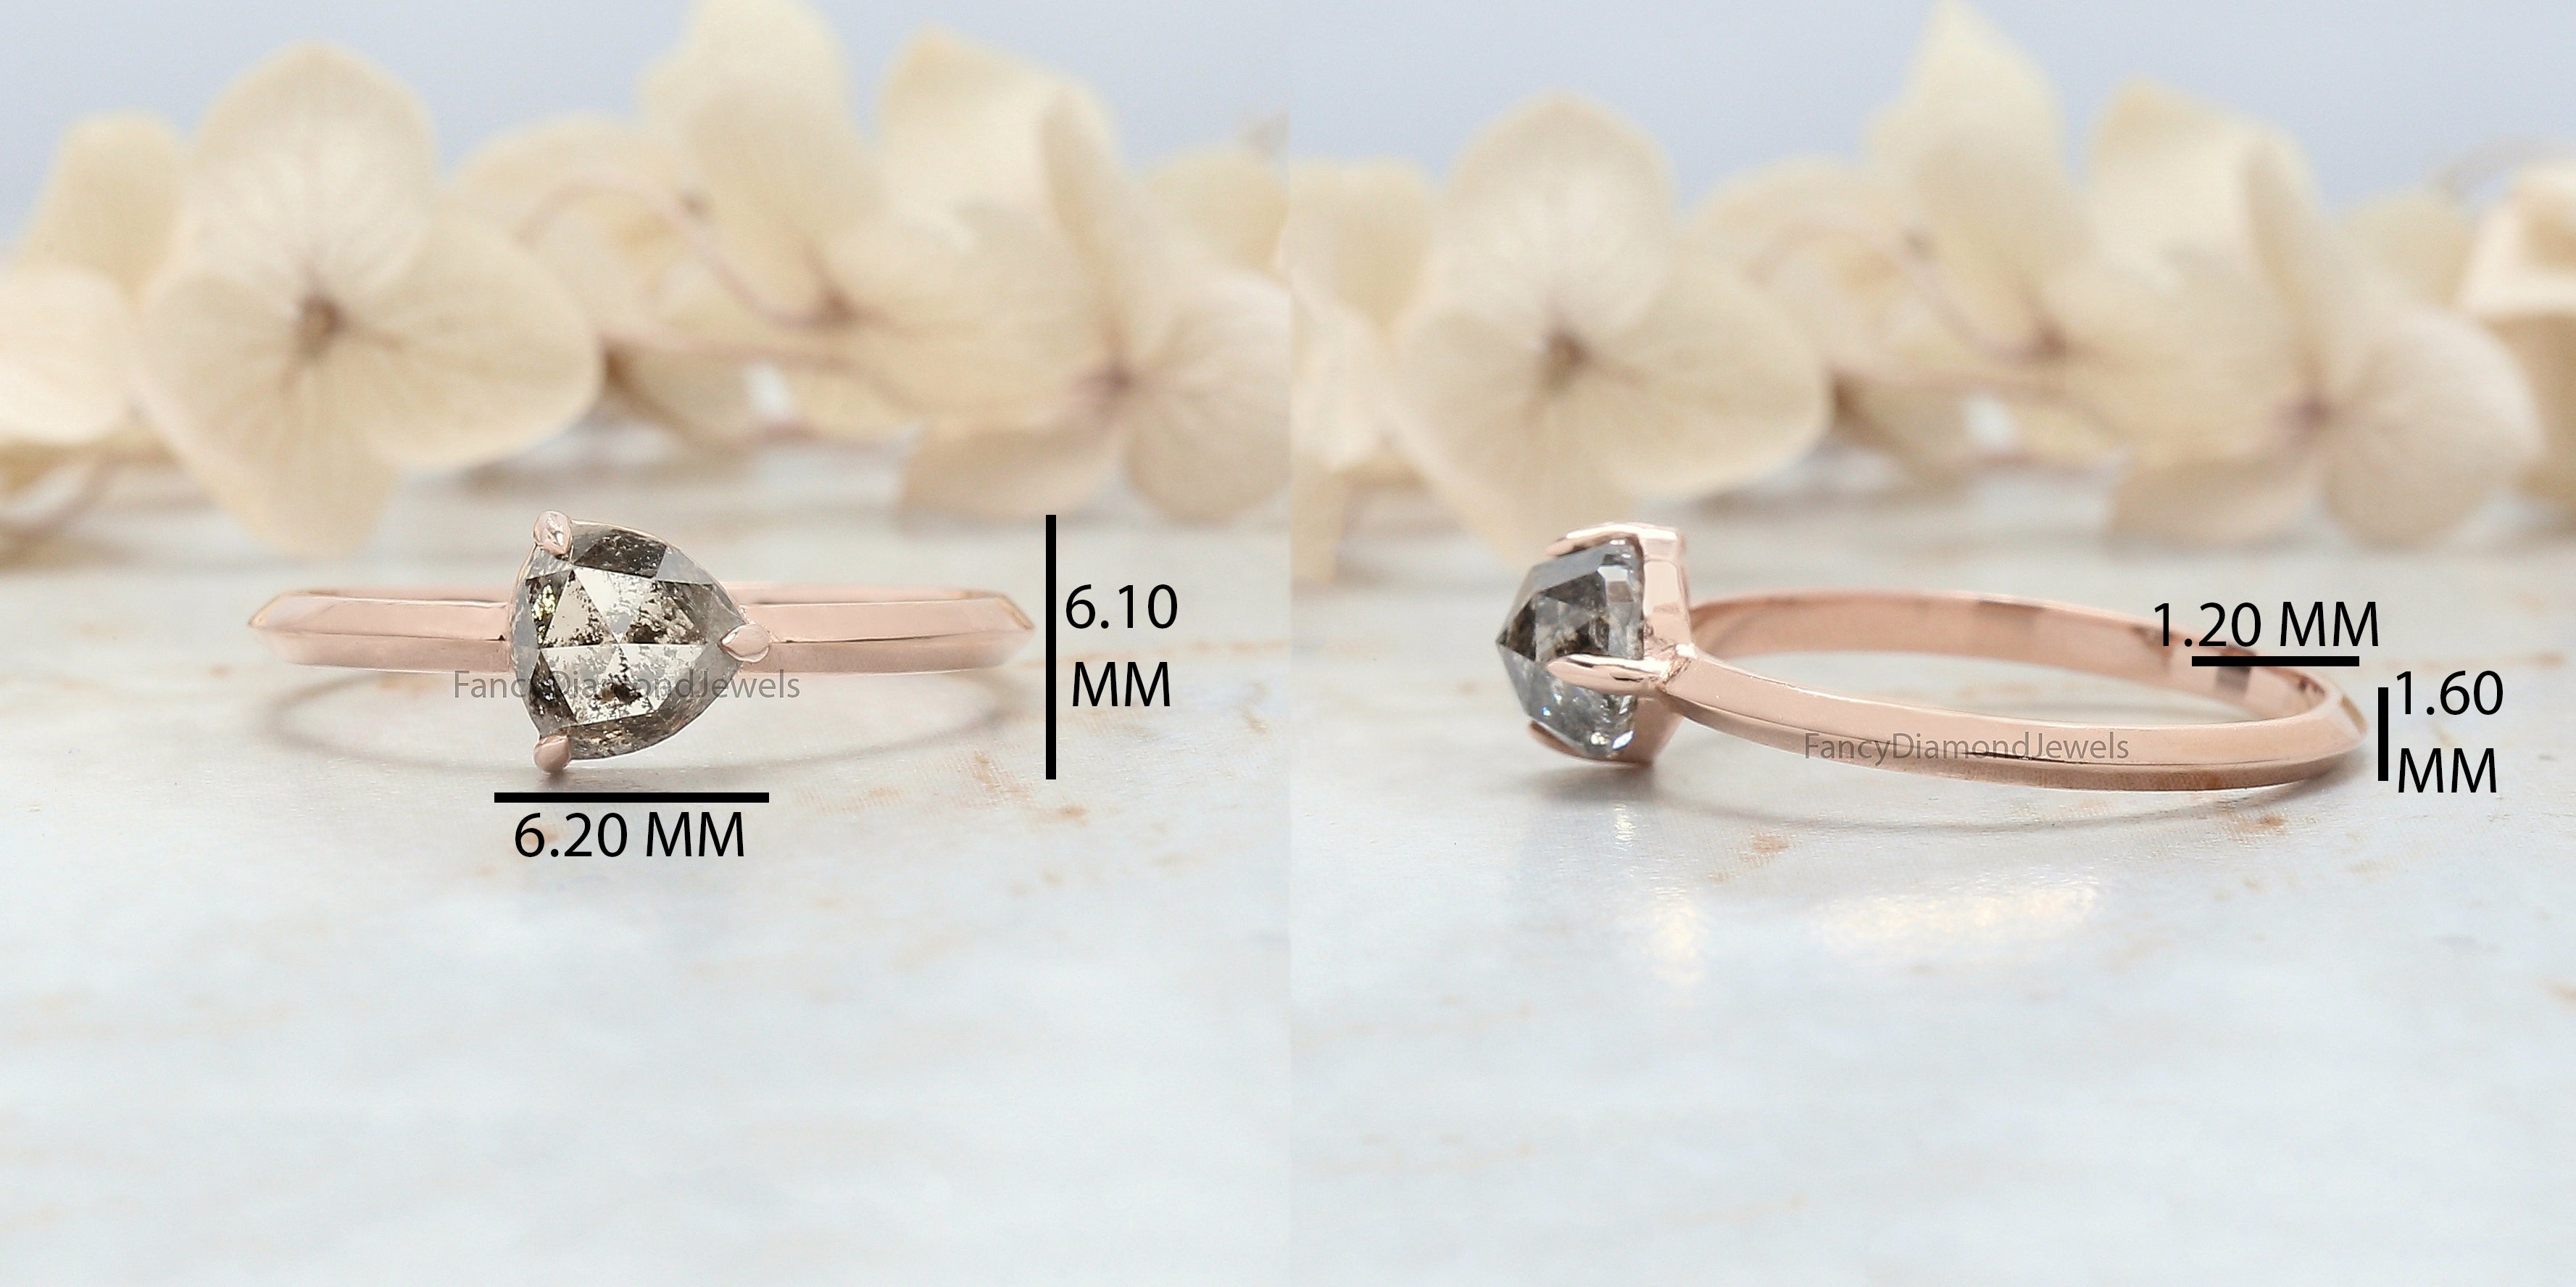 Triangle Salt And Pepper Diamond Ring 0.95 Ct 5.71 MM Triangle Diamond Ring 14K Solid Rose Gold Silver Engagement Ring Gift For Her QL3060